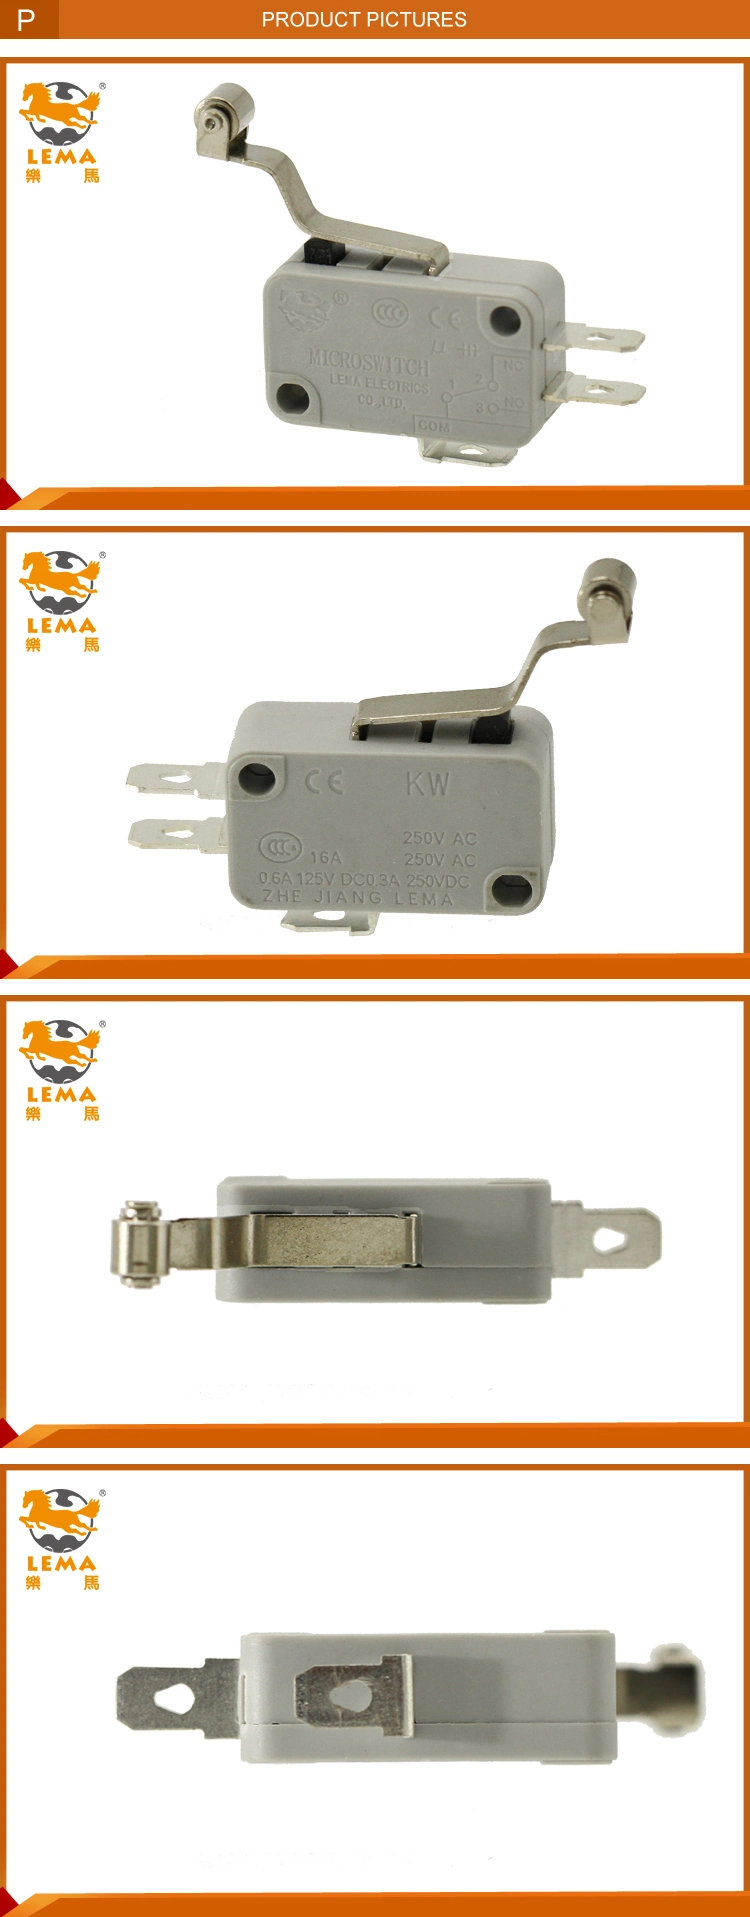 Lema Kw7-23 Roller Lever Sensitive Micro Switch CCC Ce UL VDE Micro Switch